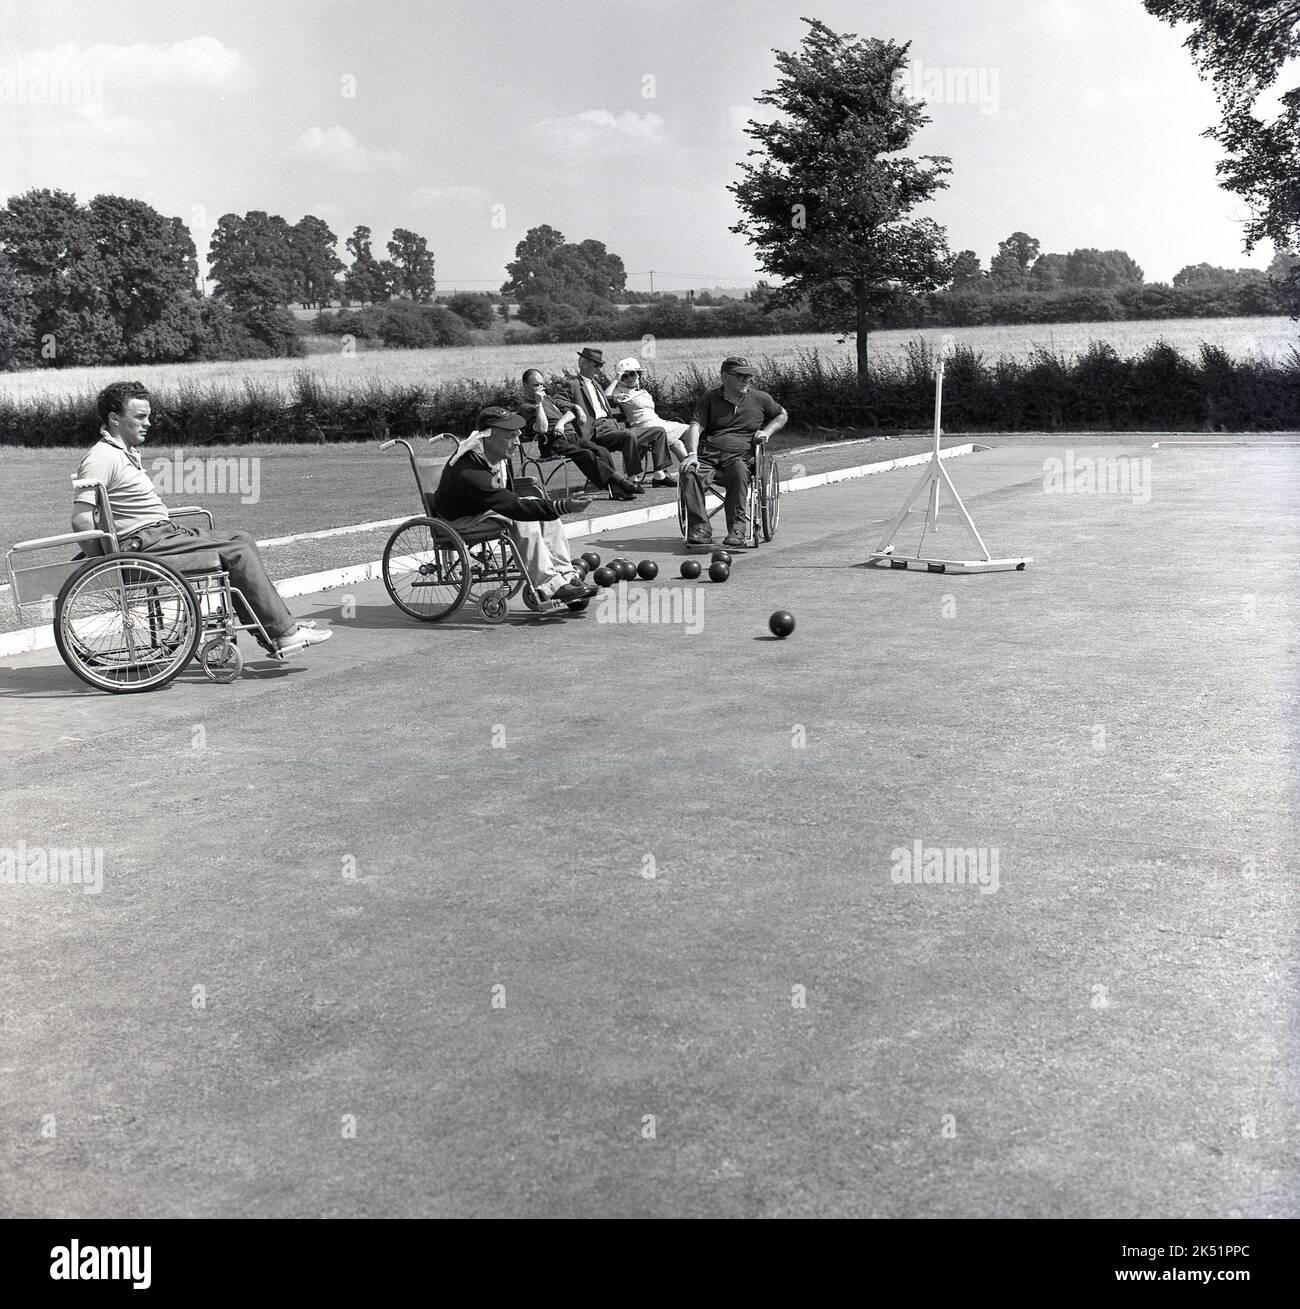 1964, historical, in the grounds of Stoke Mandeville Hospital, home of the National Spinal Injuries Centre - established in 1944 by Dr. Ludwig Guttmann - wheelchair competitors taking part in a bowls tournament. Stoke Mandeville in Aylesbury, Buckinghamshire, England, UK, was the birthplace of the Paralympic movement in 1948, the year of the post-war London Olympics, when the first competition for wheelchair athletes took place. 16 injured serviceman and women took part in what was known as the Stoke Mandeville Games, which later became the Paralympic Games. Stock Photo